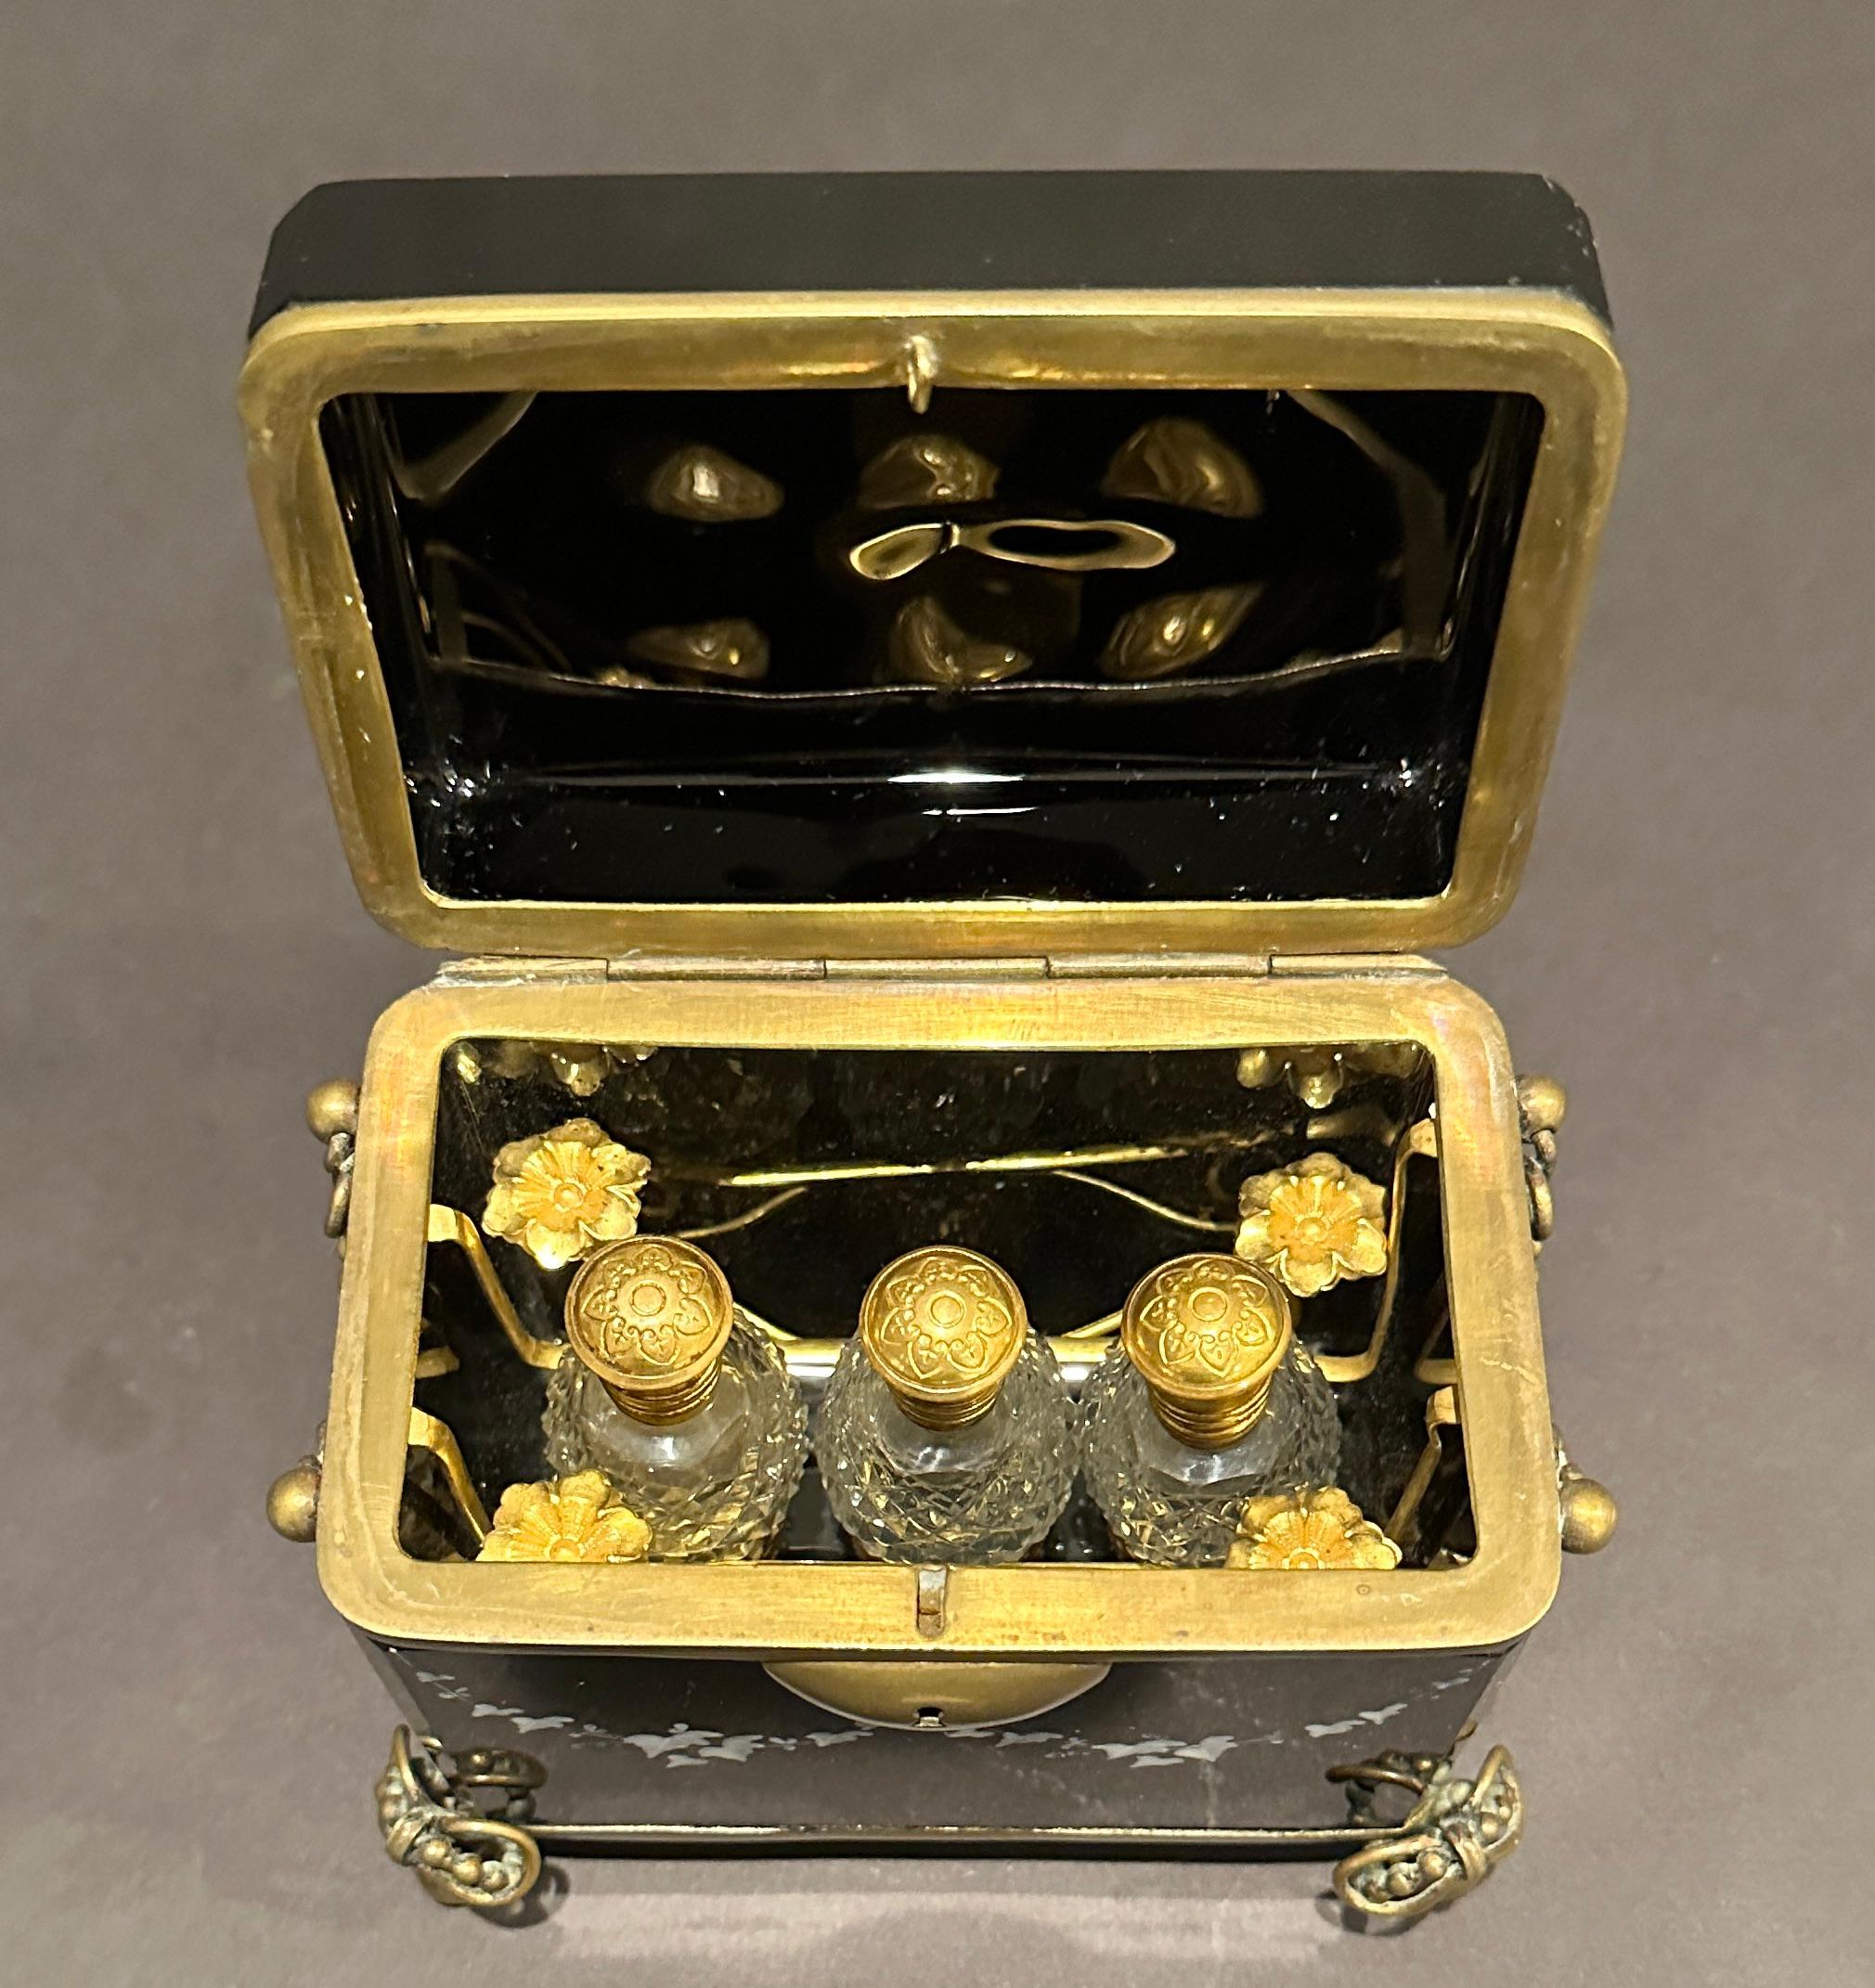 Exquisite piece of Mary Gregory  all original black amethyst glass hinged perfume box. Inside is formed with gilt wire inserts with  three glass scent or cut glass perfume bottles complete with glass stoppers. White painted enamel details of a